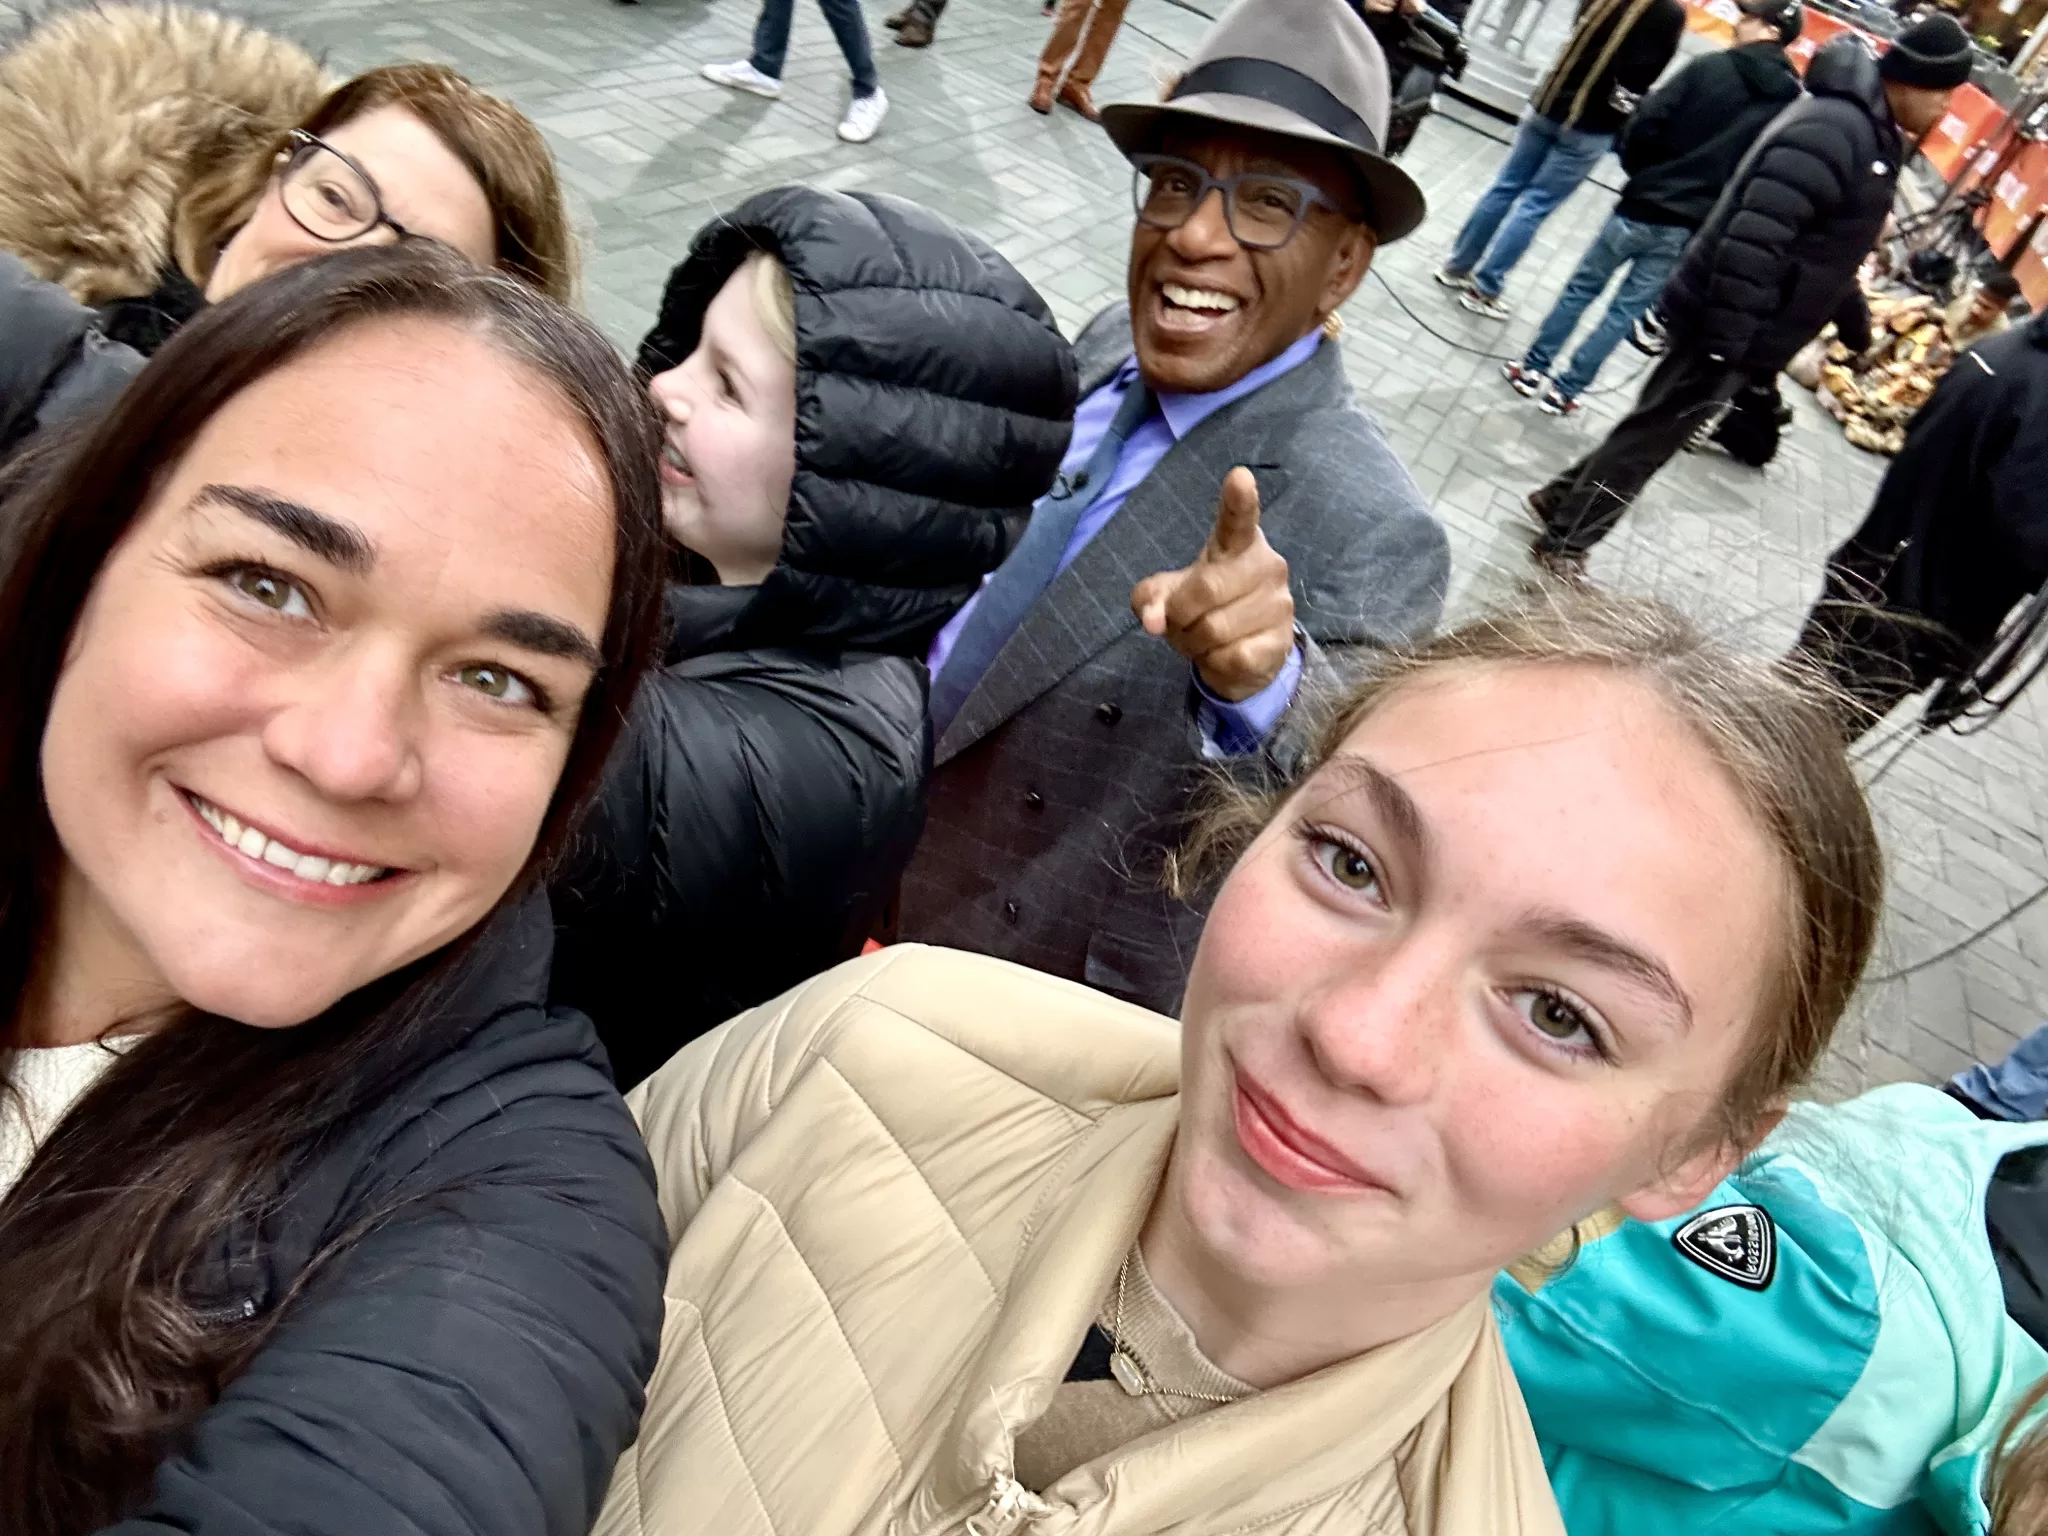 the today show in NYC. a selfie with Al Roker